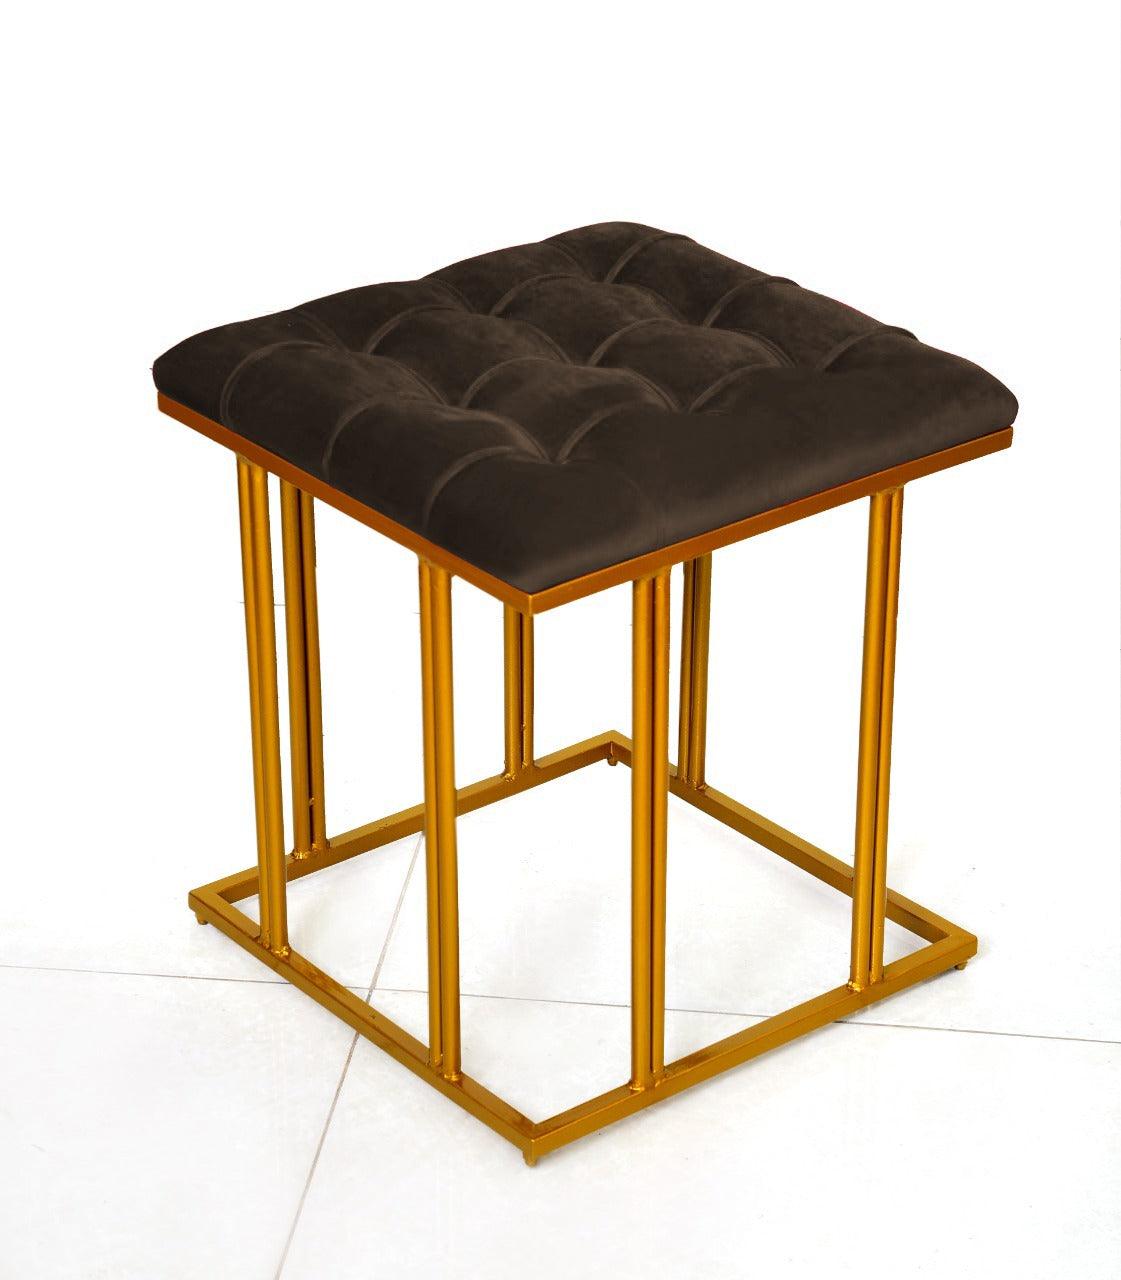 Luxury Velvet Square Stool With Steel Stand -906 - 92Bedding